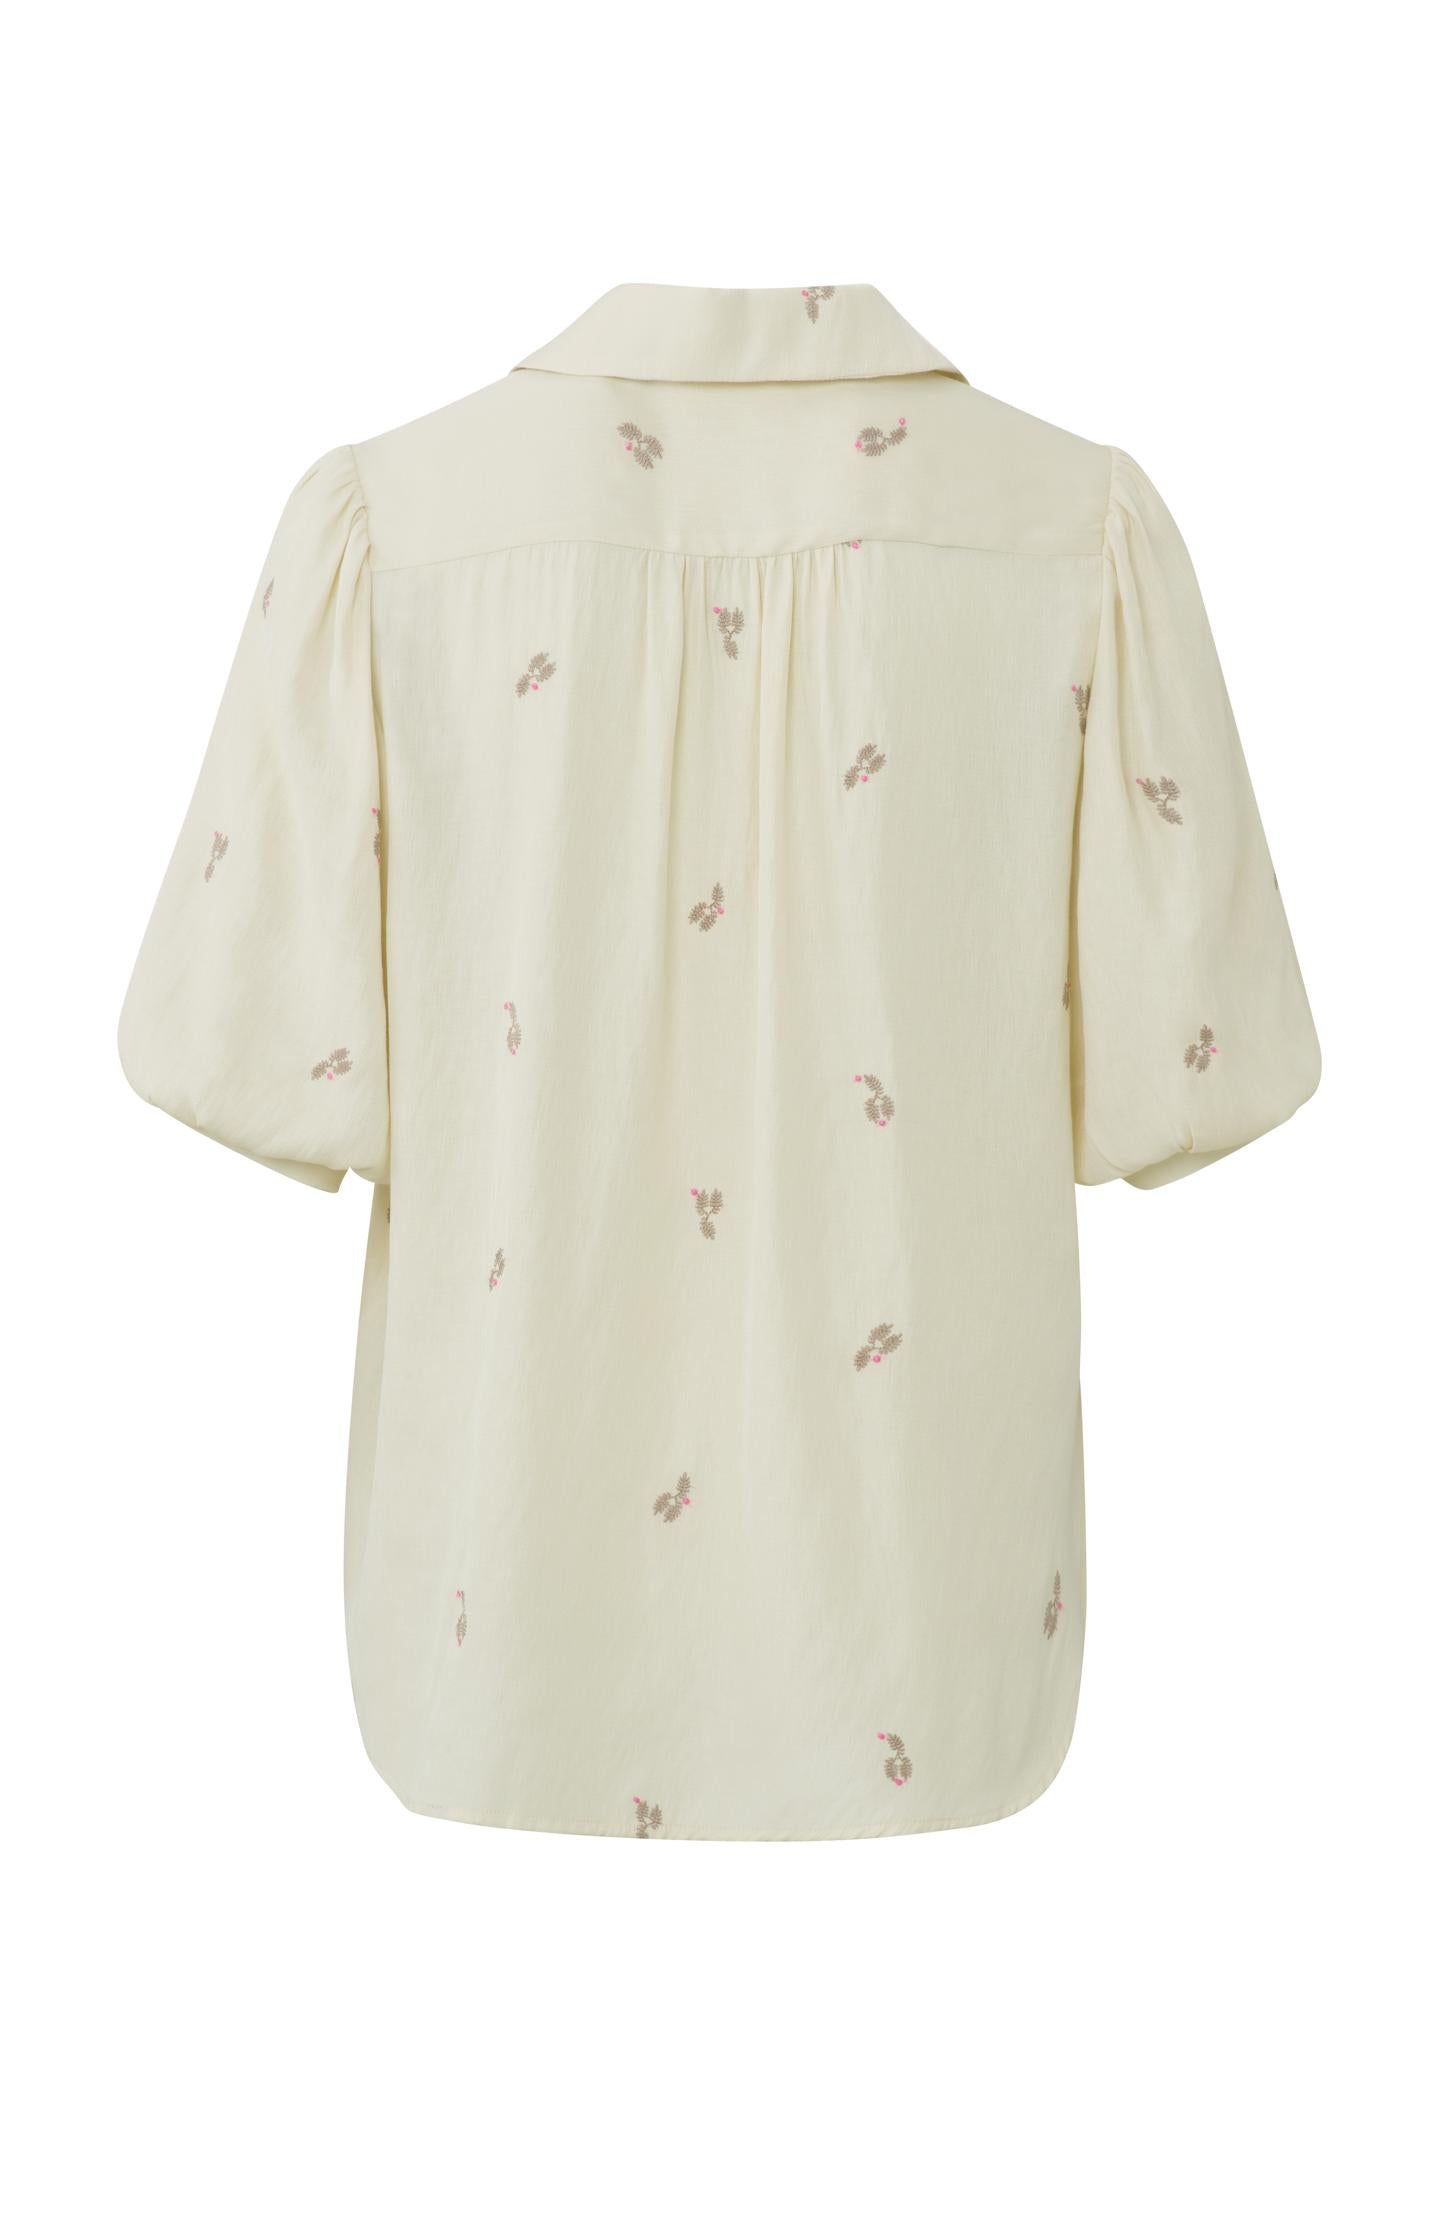 Tunic top with V-neck, short puff sleeves and subtle print